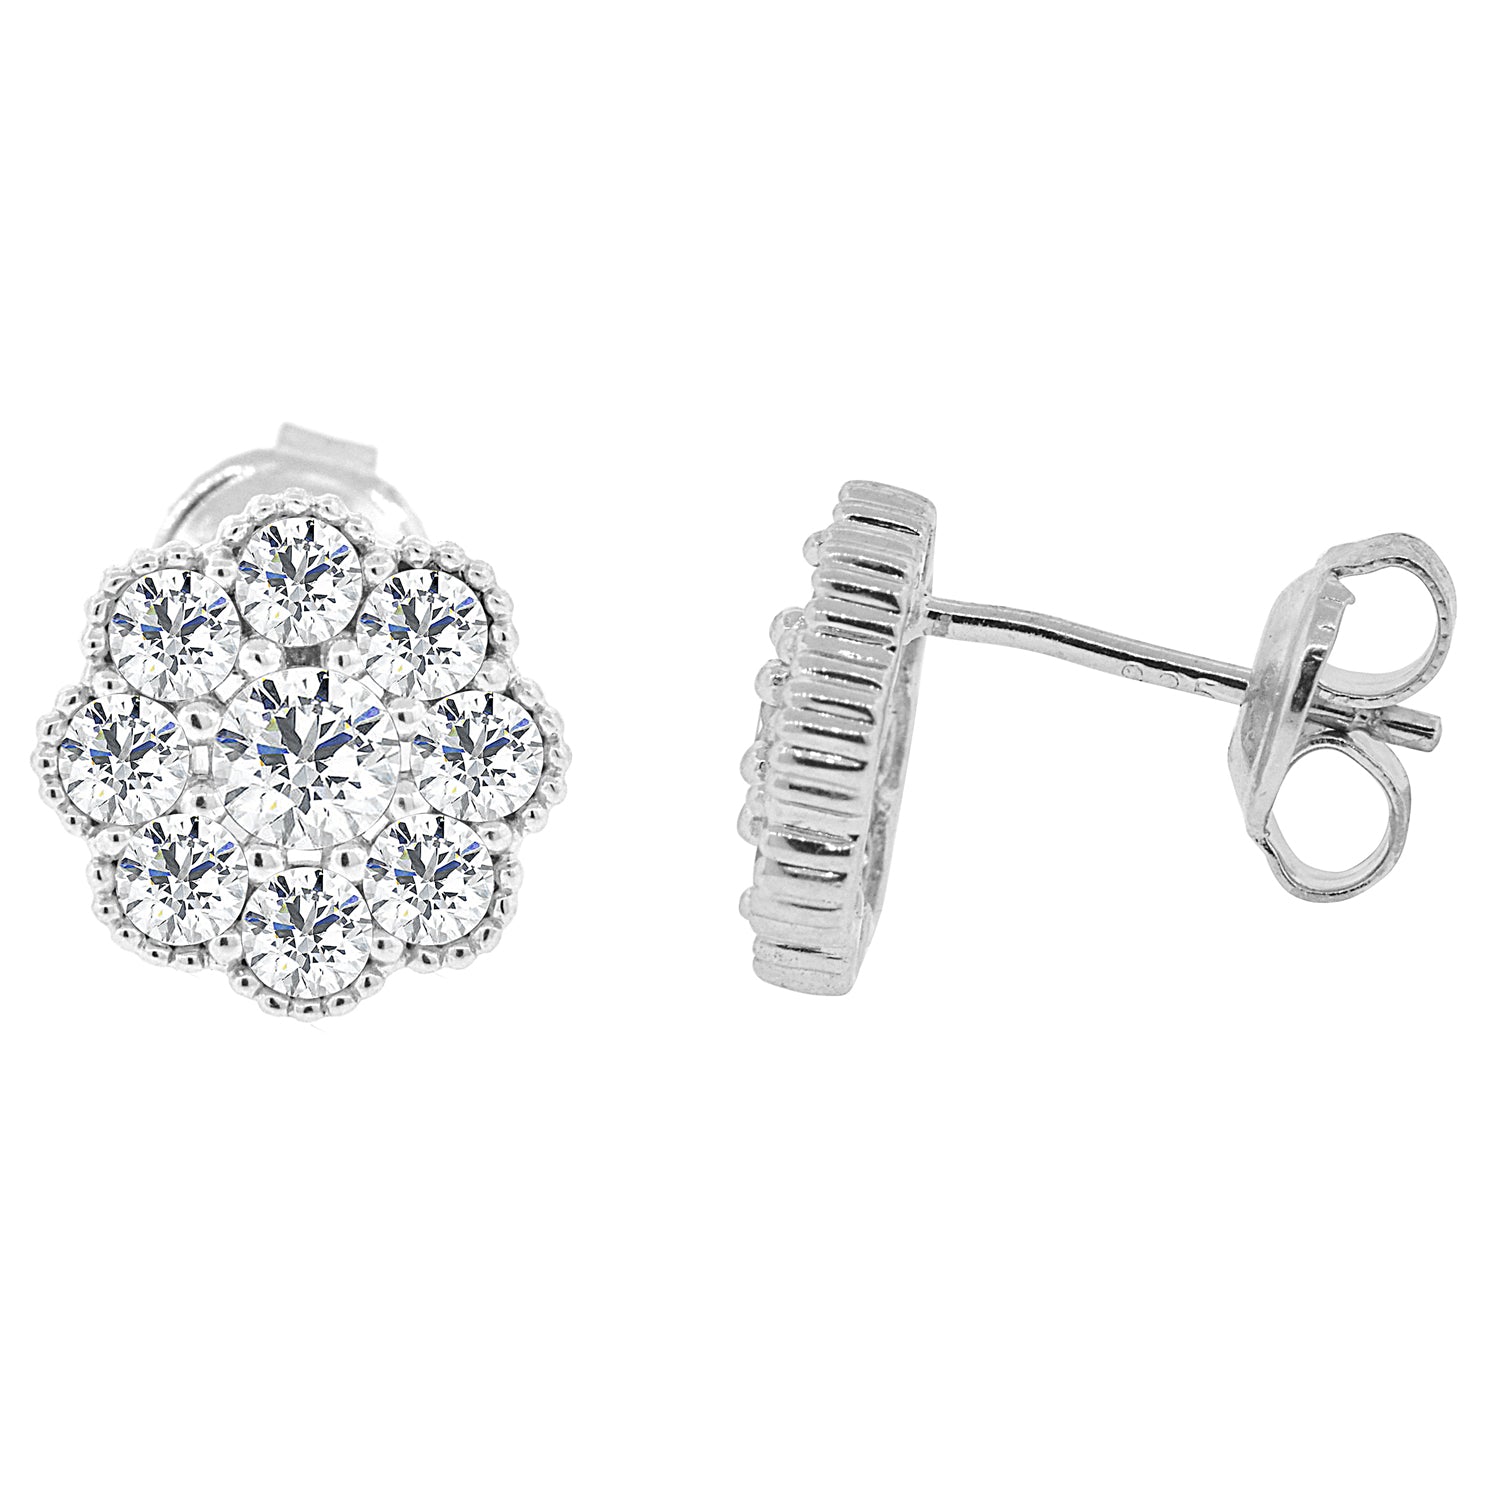 Chloe 18k White Gold Plated Sterling Silver Flower Stud Earrings with Simulated Diamond CZ Crystals